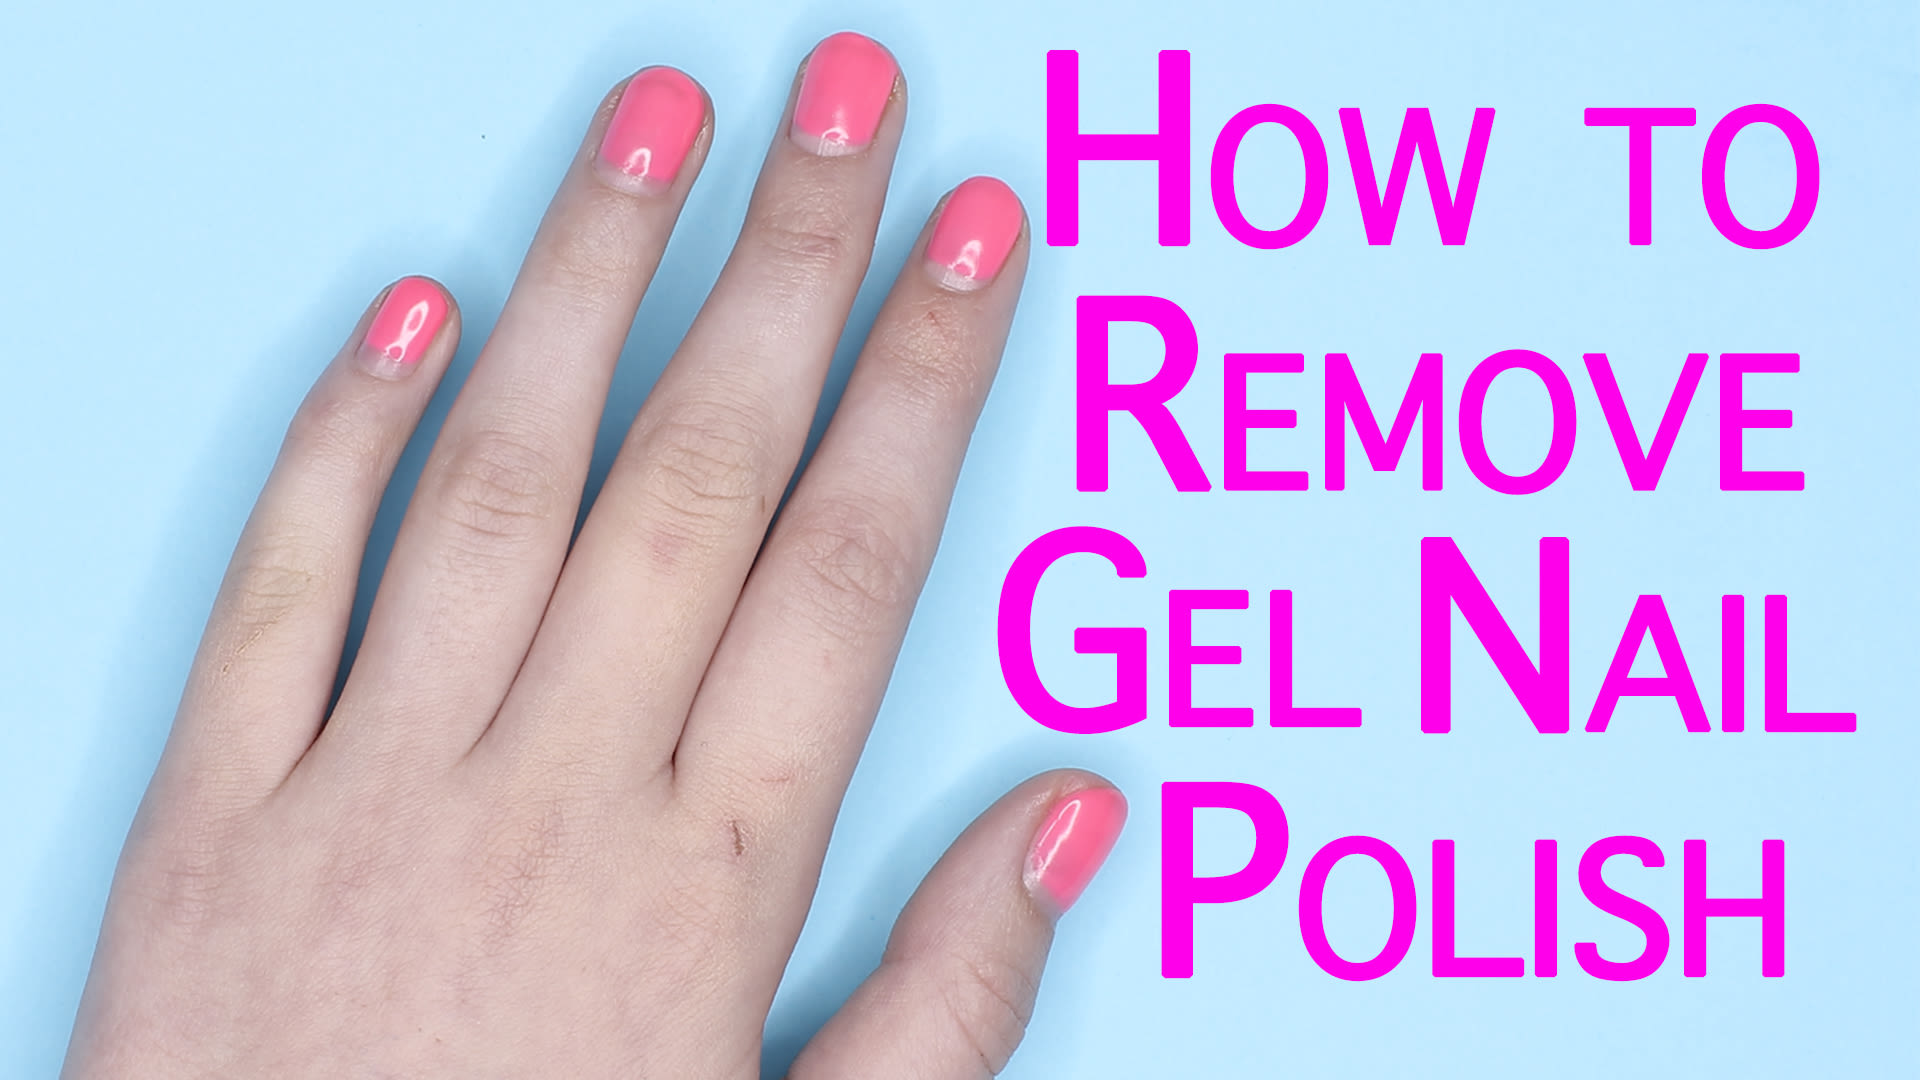 www.wikihow.com/images/thumb/1/14/Remove-Gel-Nail-...